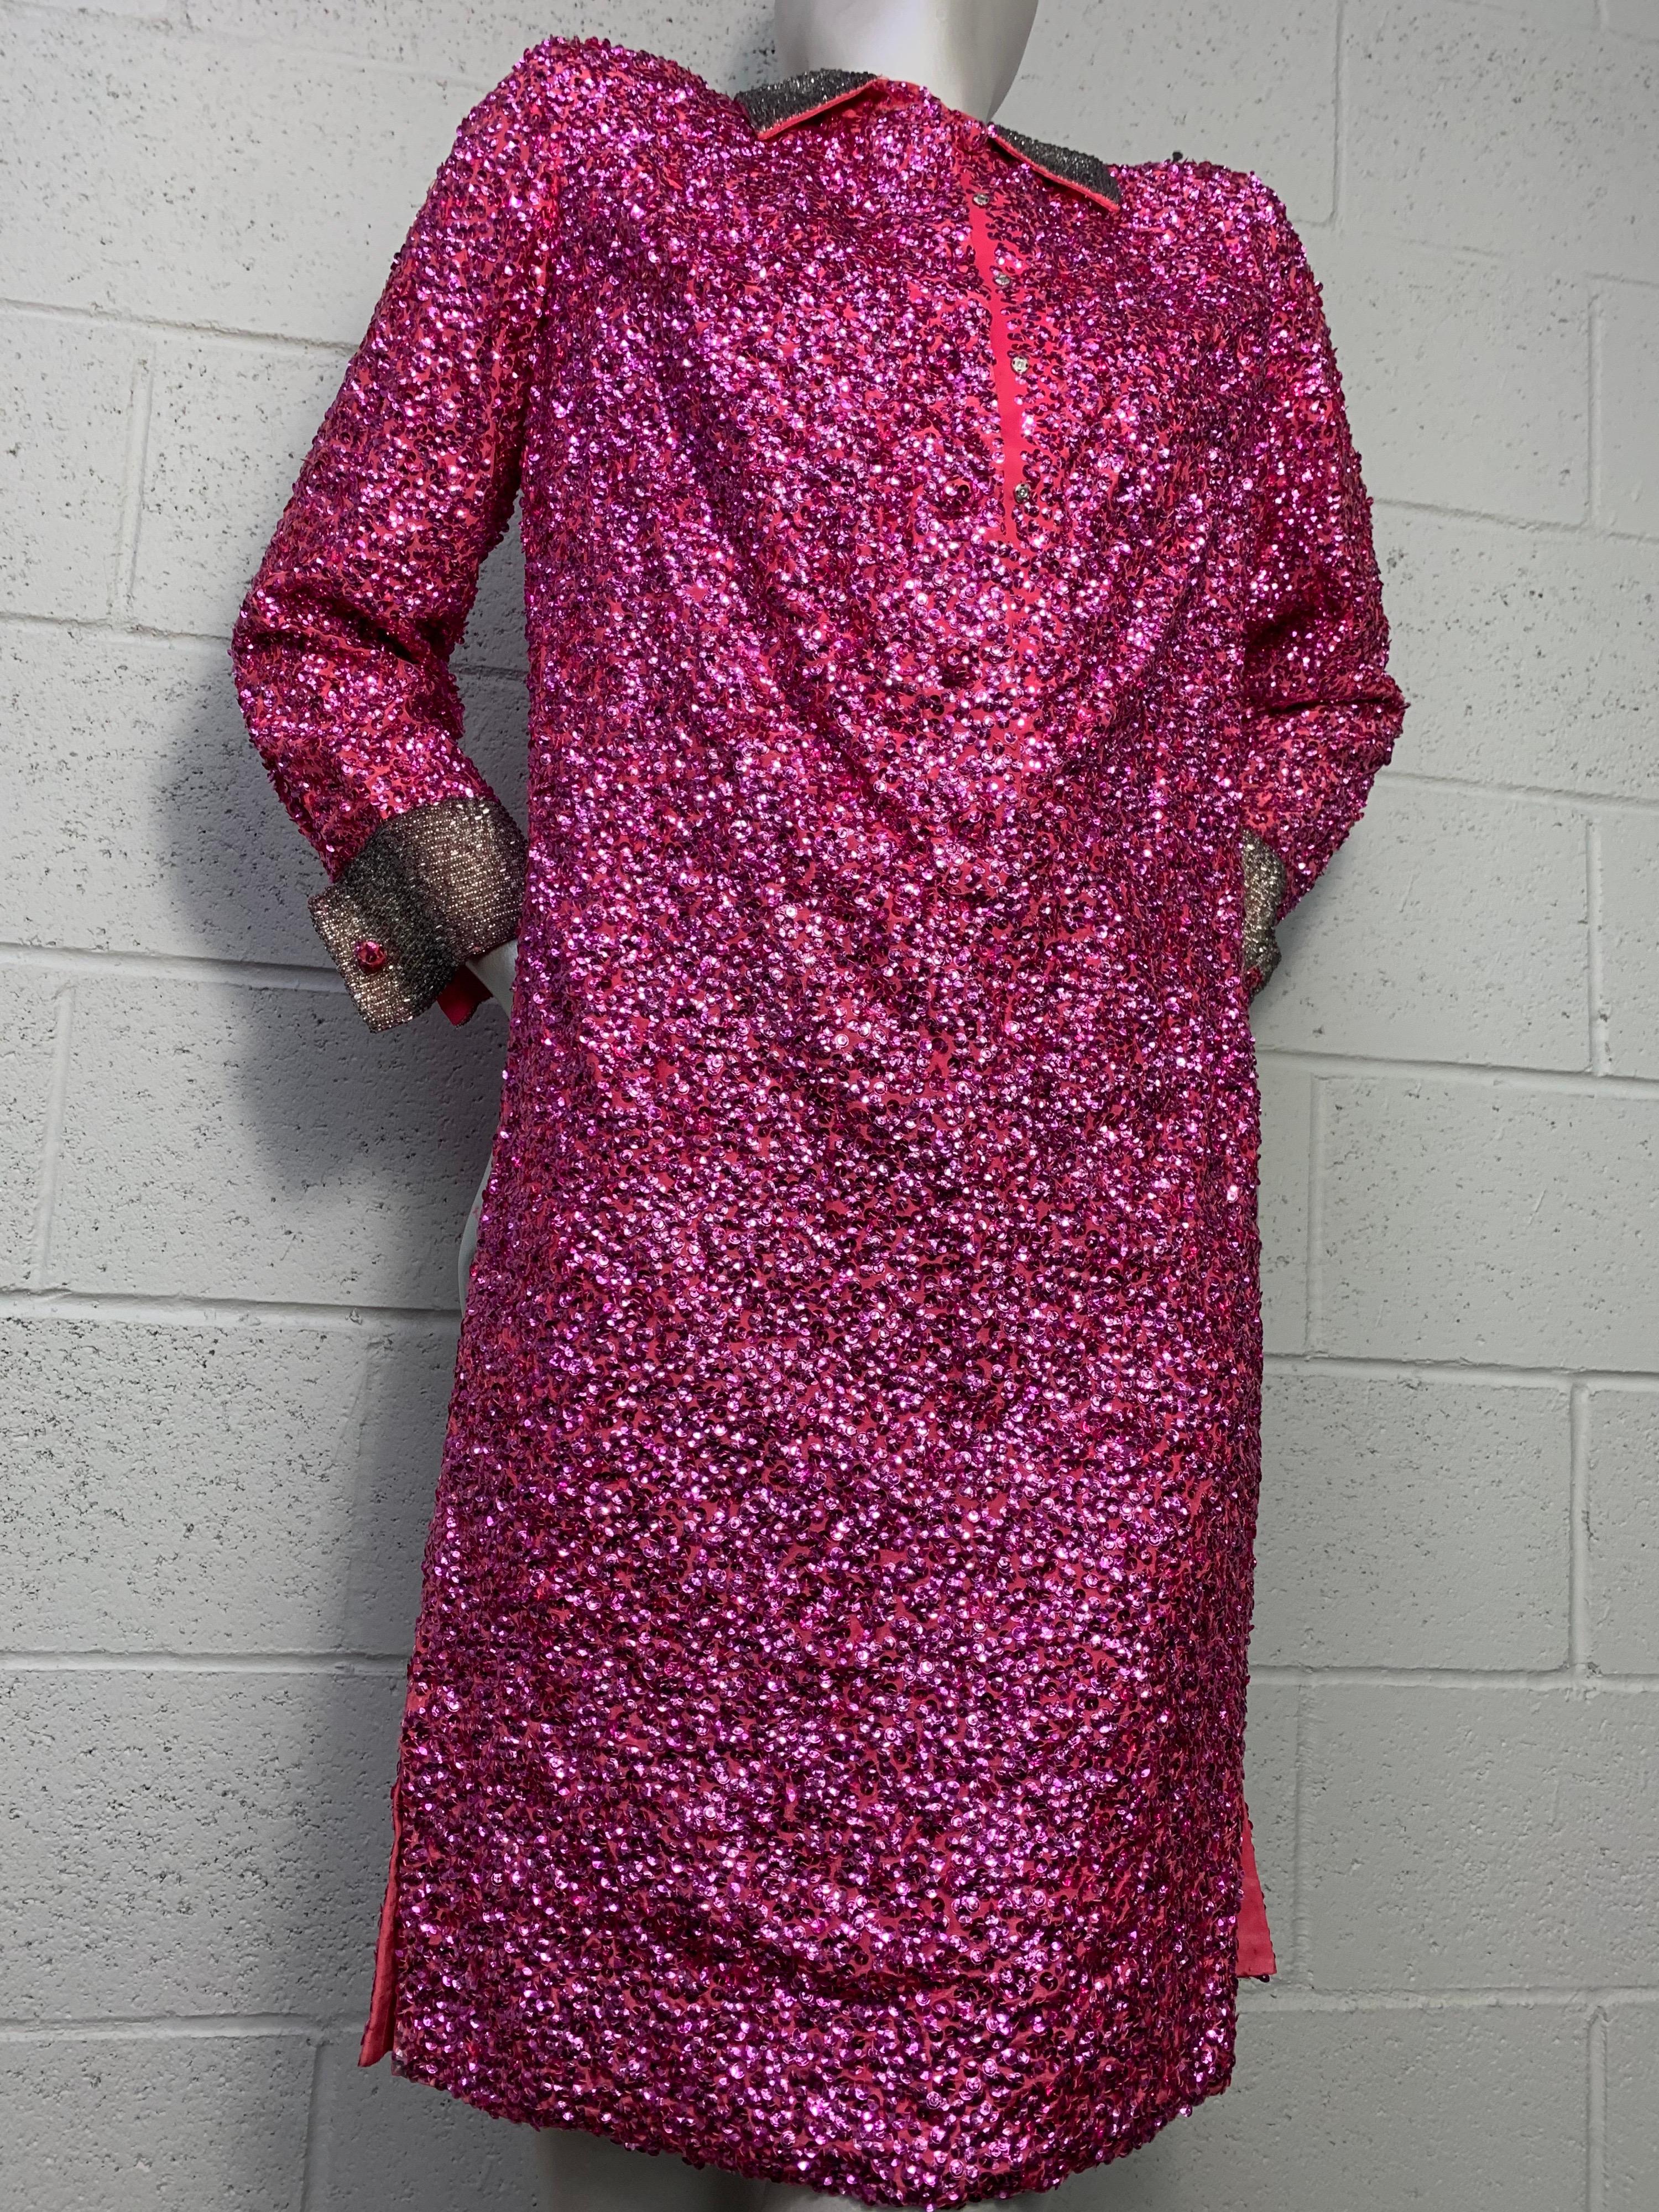 1960s Vivid Fuchsia Sequined Mod Mini Dress w/ Silver Beaded Collar and Cuffs For Sale 11